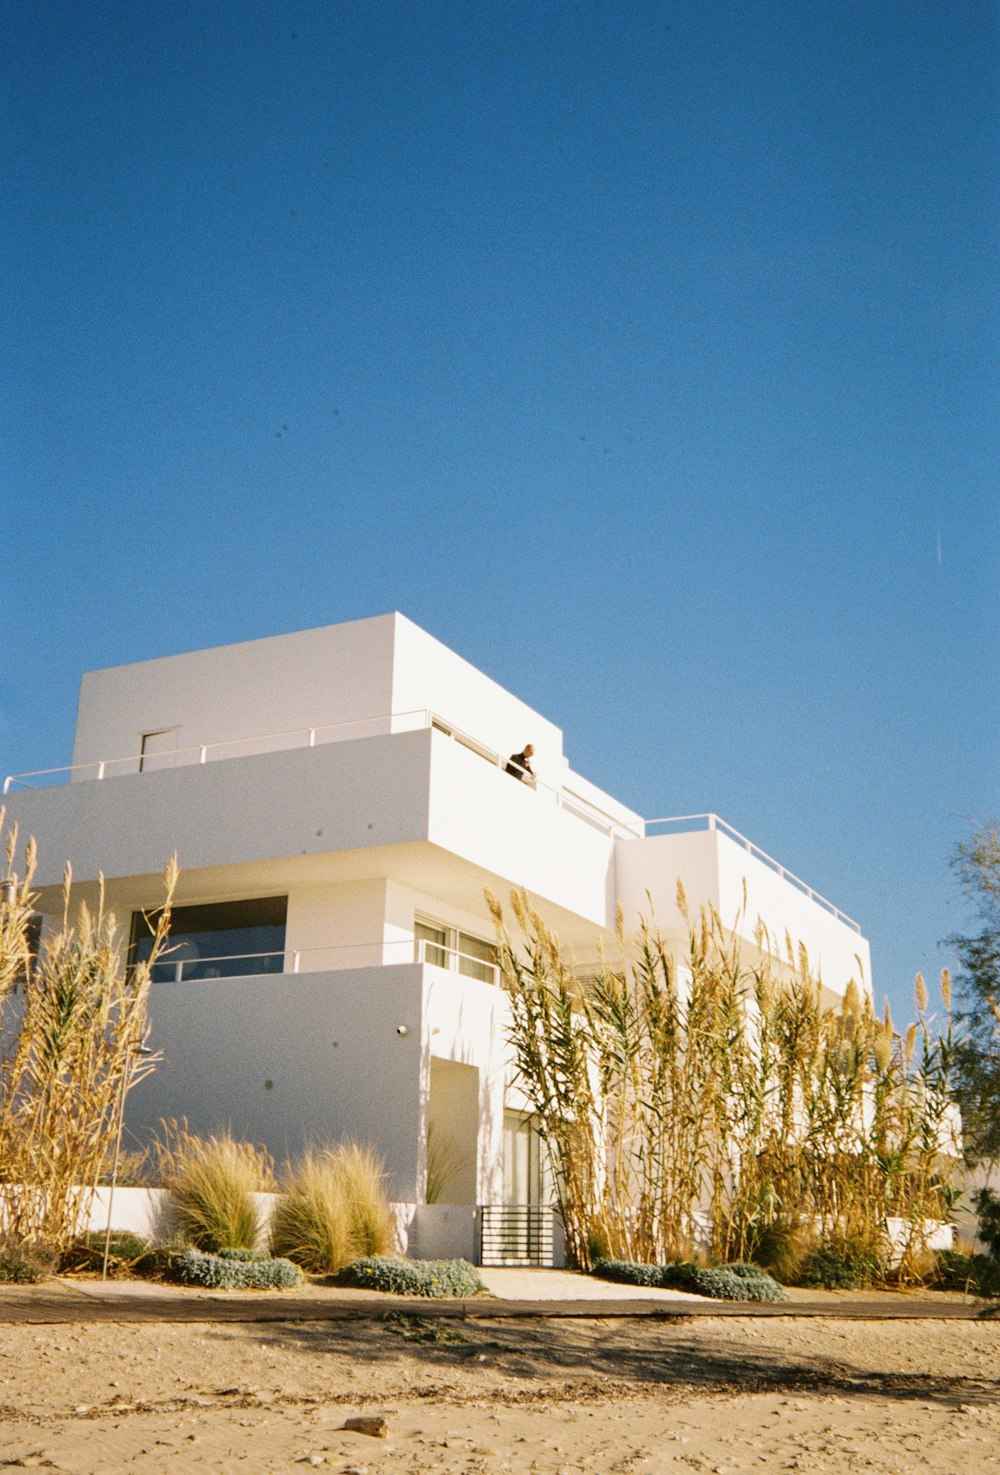 a large white building sitting on top of a sandy beach